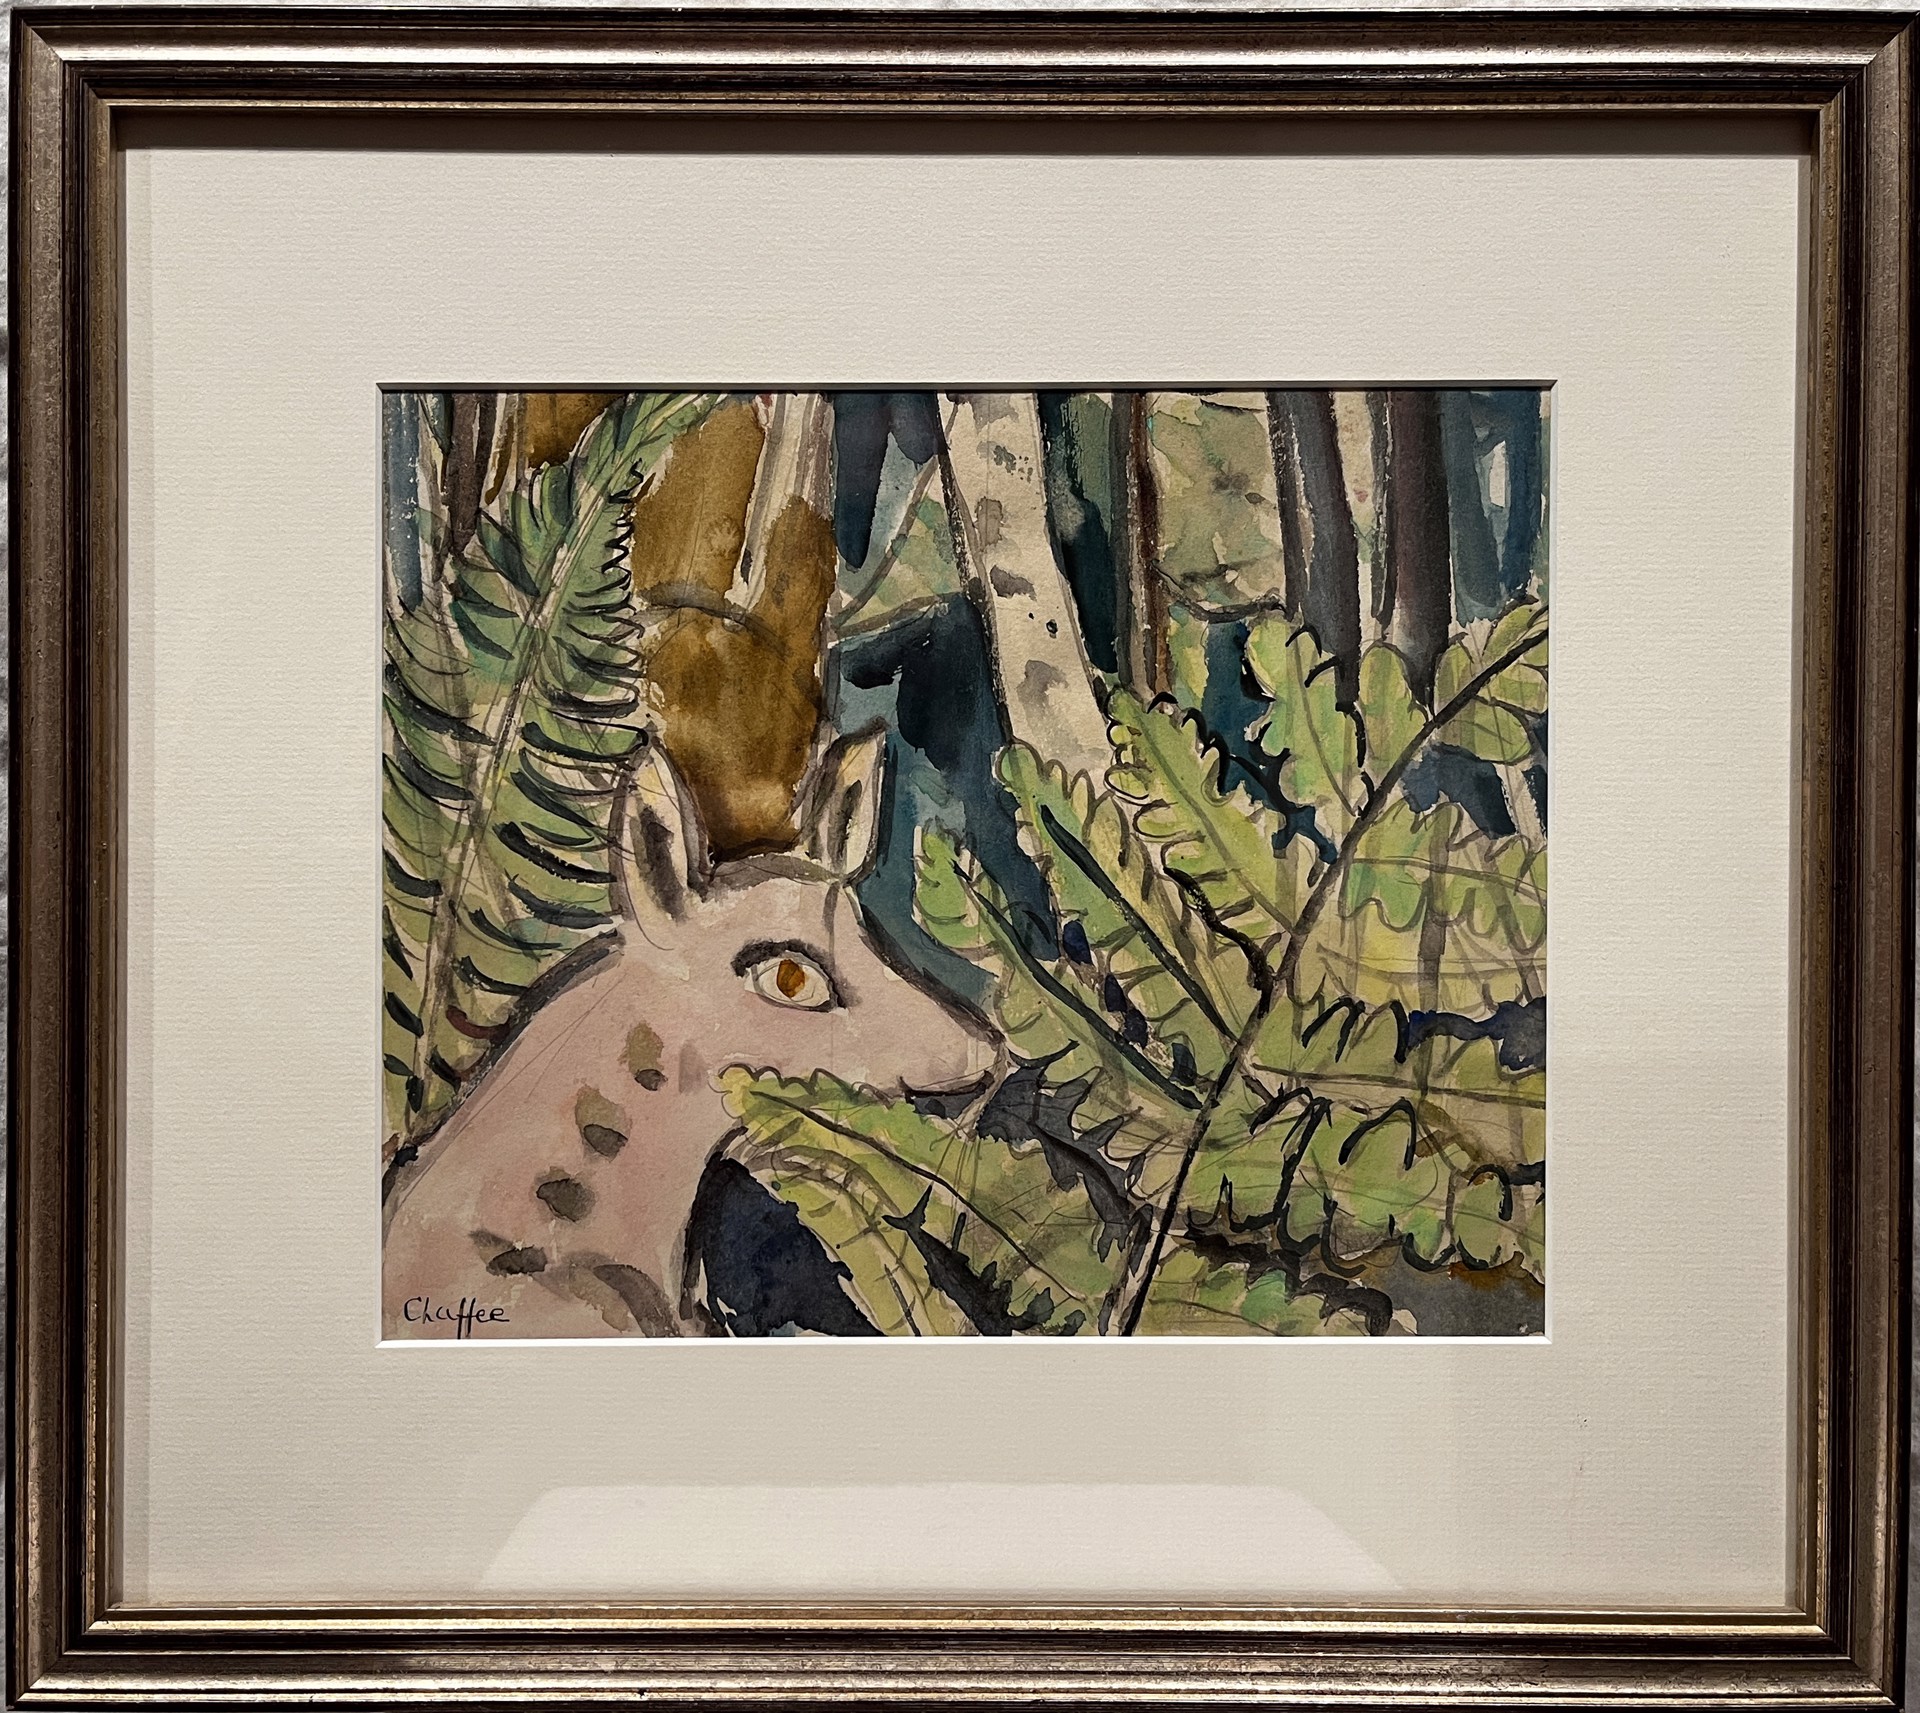 Fawn and Ferns by Oliver Chaffee